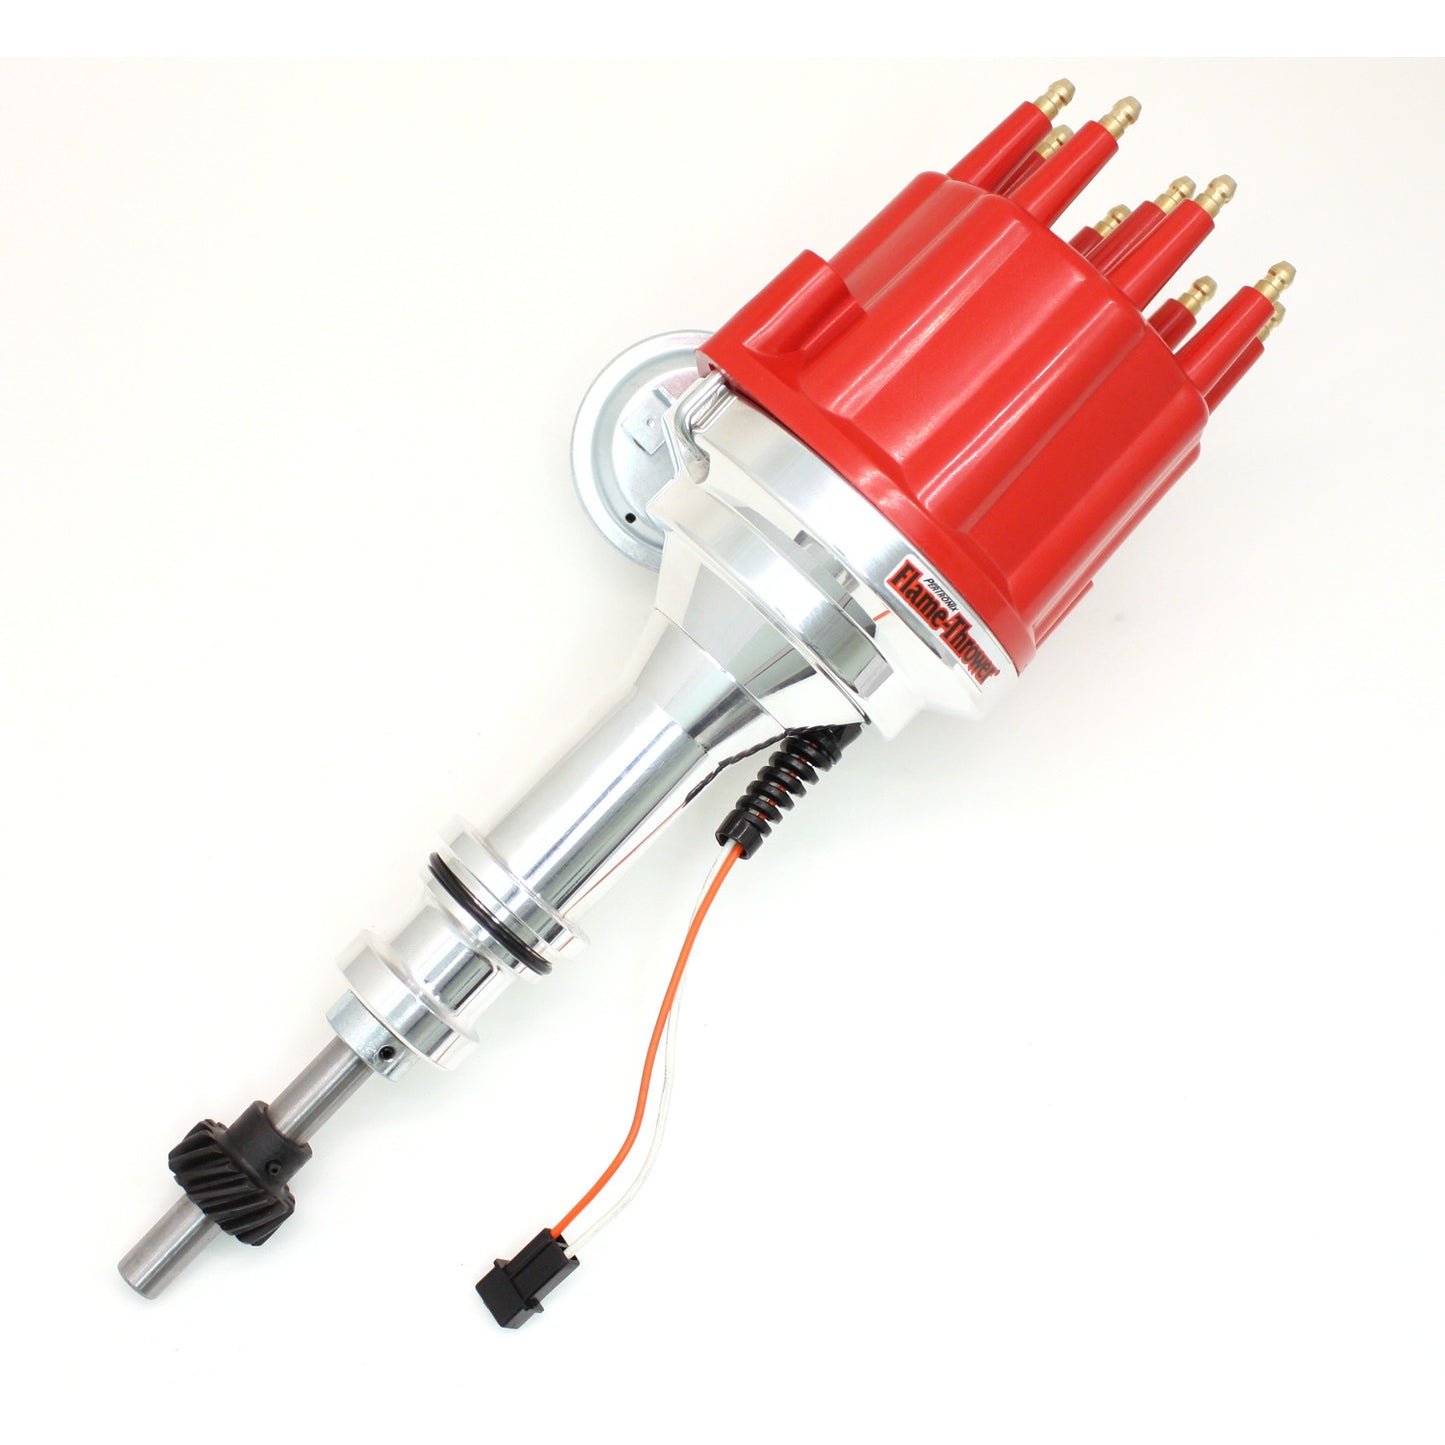 PerTronix D331711 Flame-Thrower Electronic Distributor Billet Magnetic Trigger Ford 351W Red Male Cap Vacuum Advance